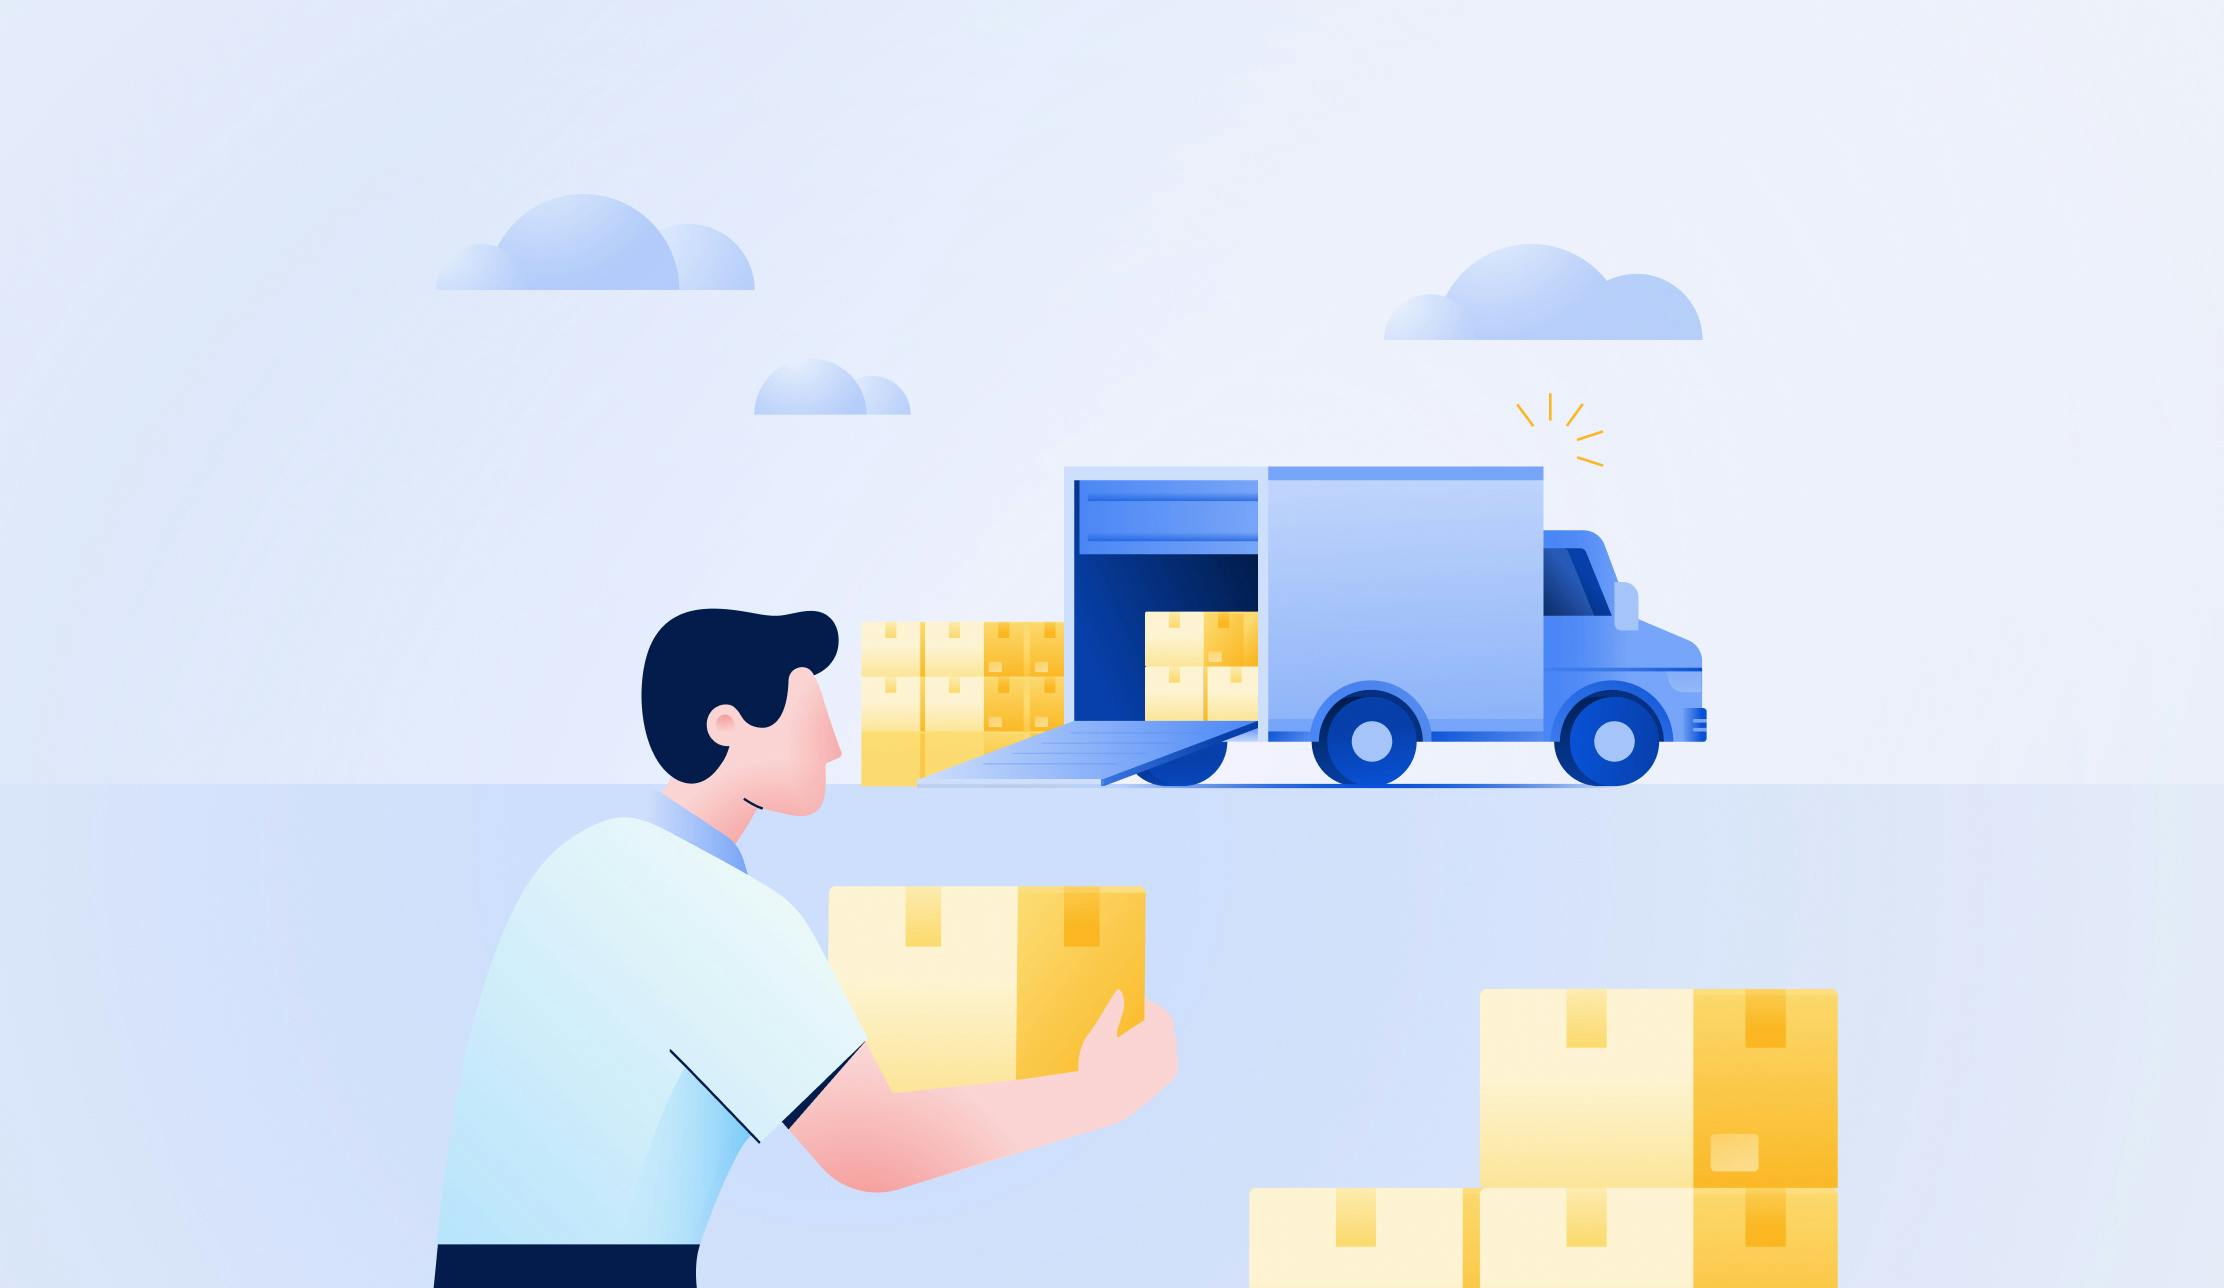 Why First Mile delivery is Important in Logistics & eCommerce?